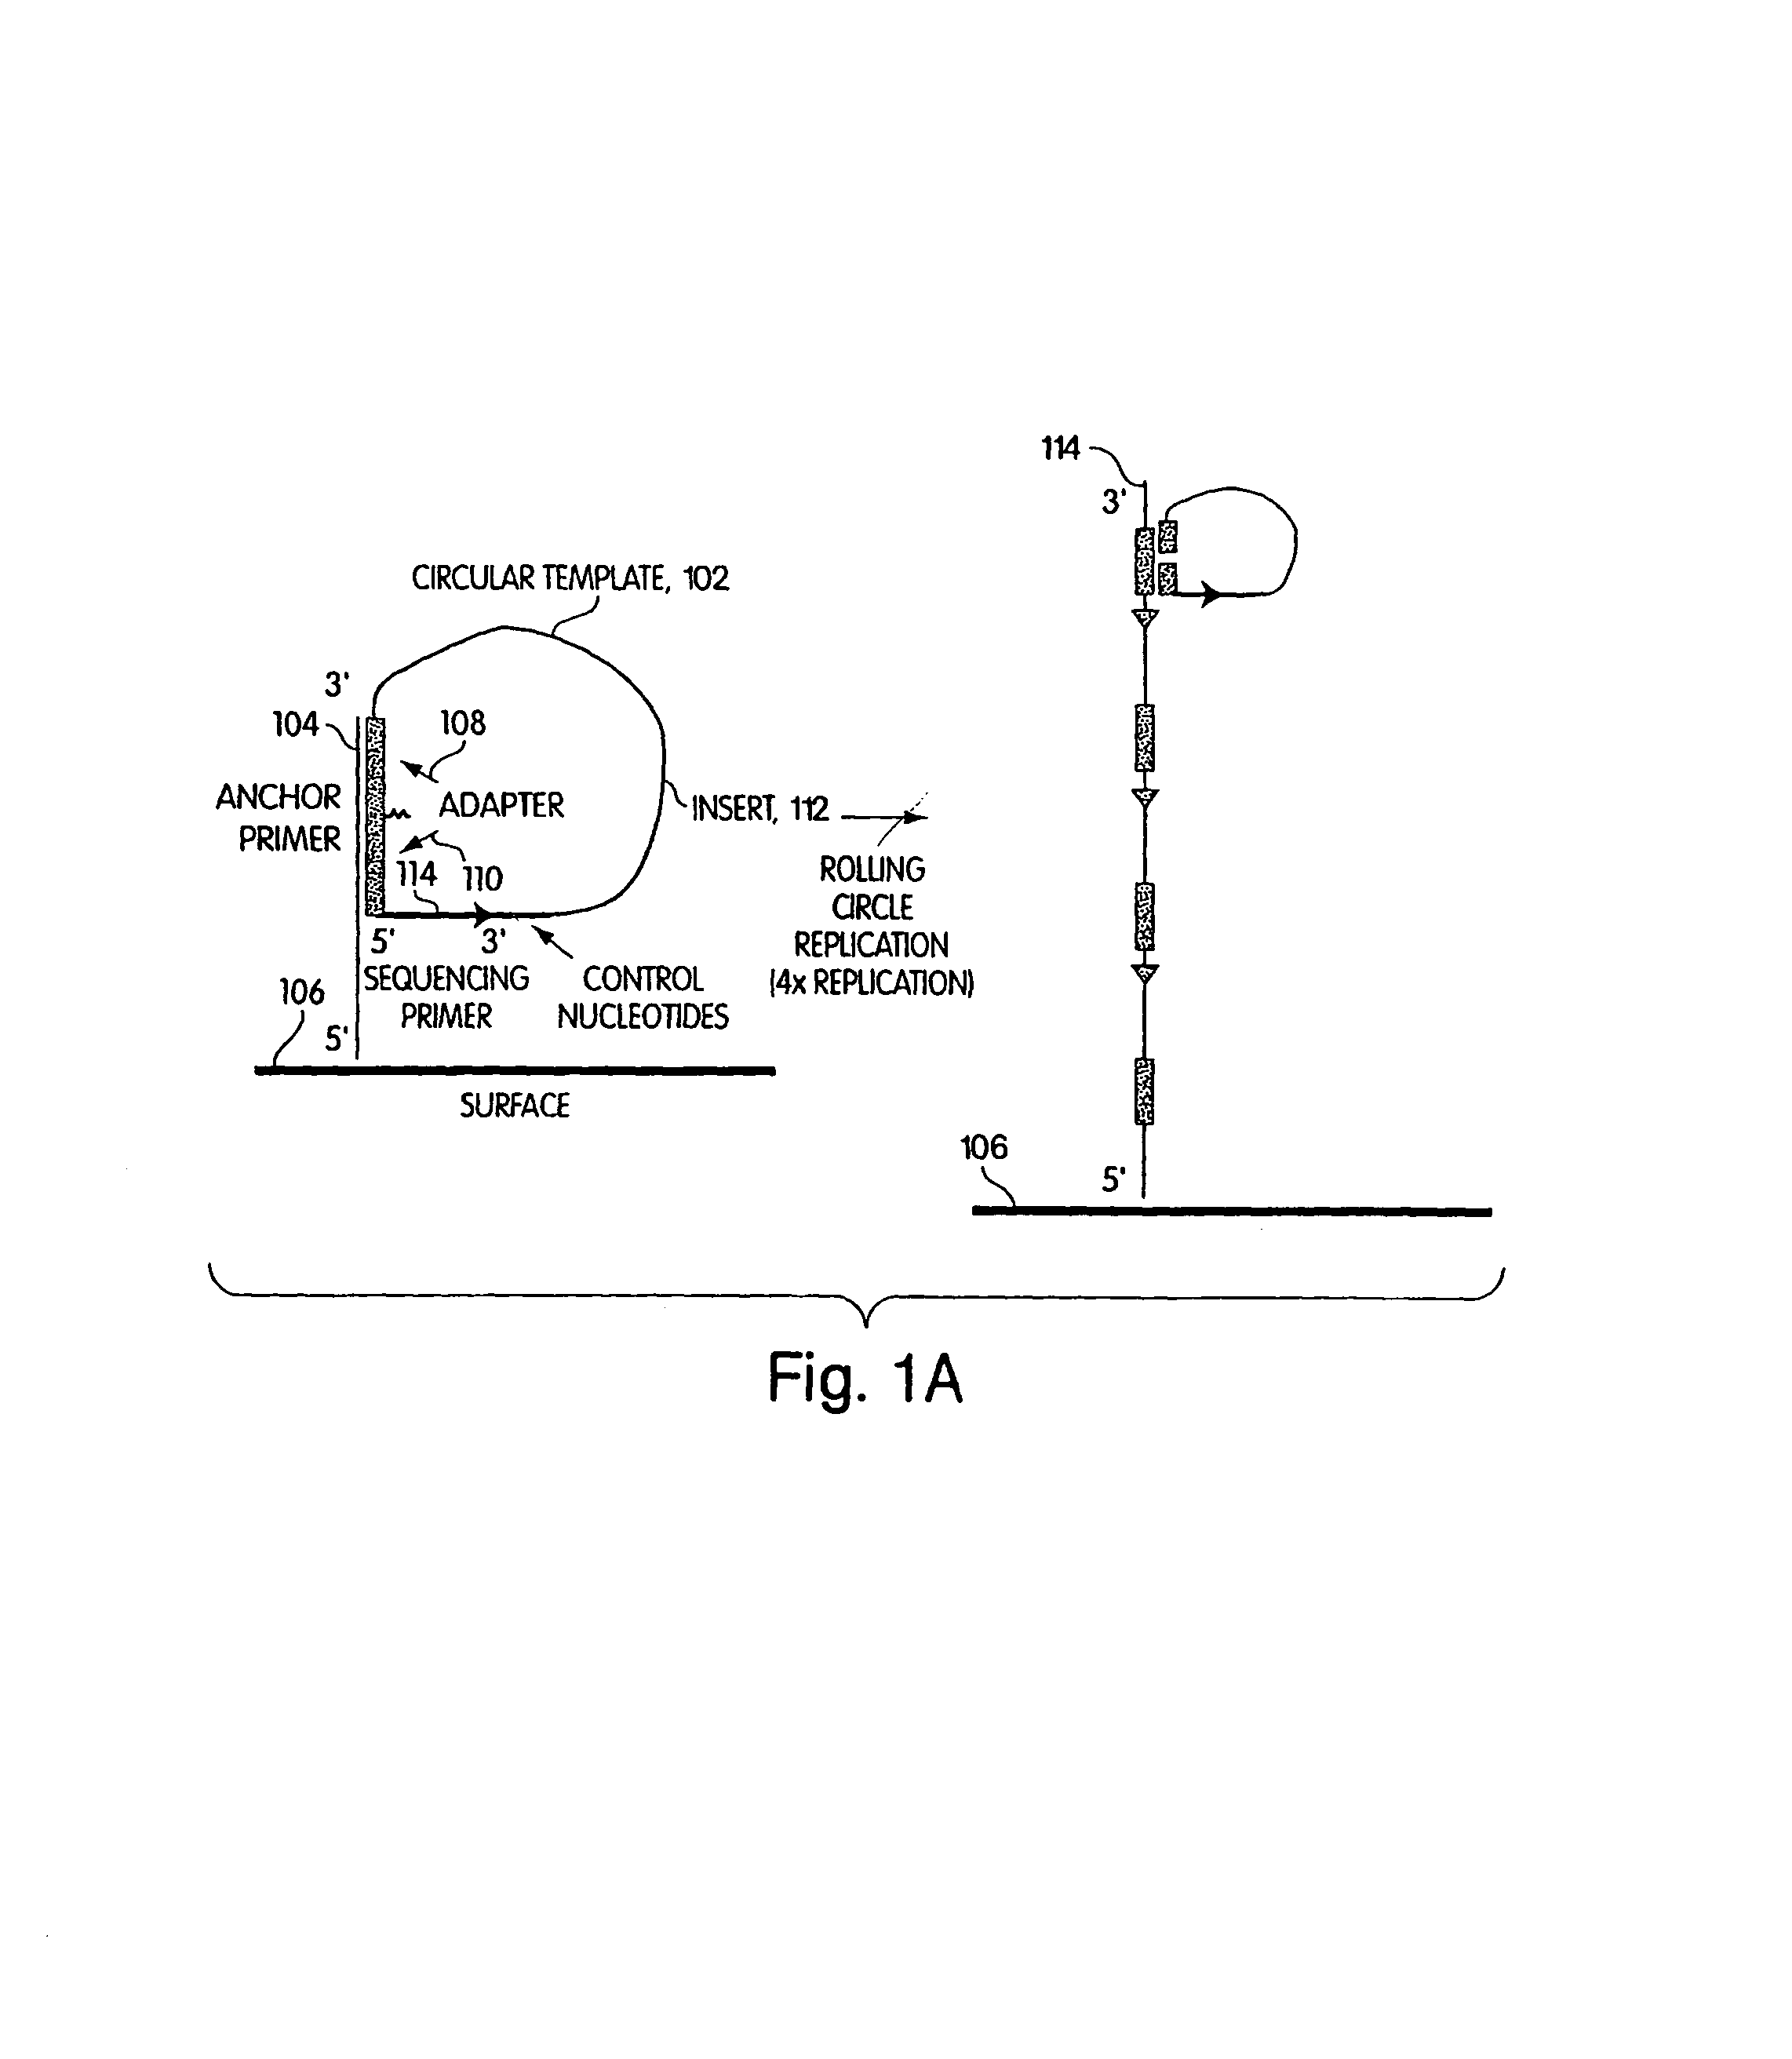 Method of sequencing a nucleic acid